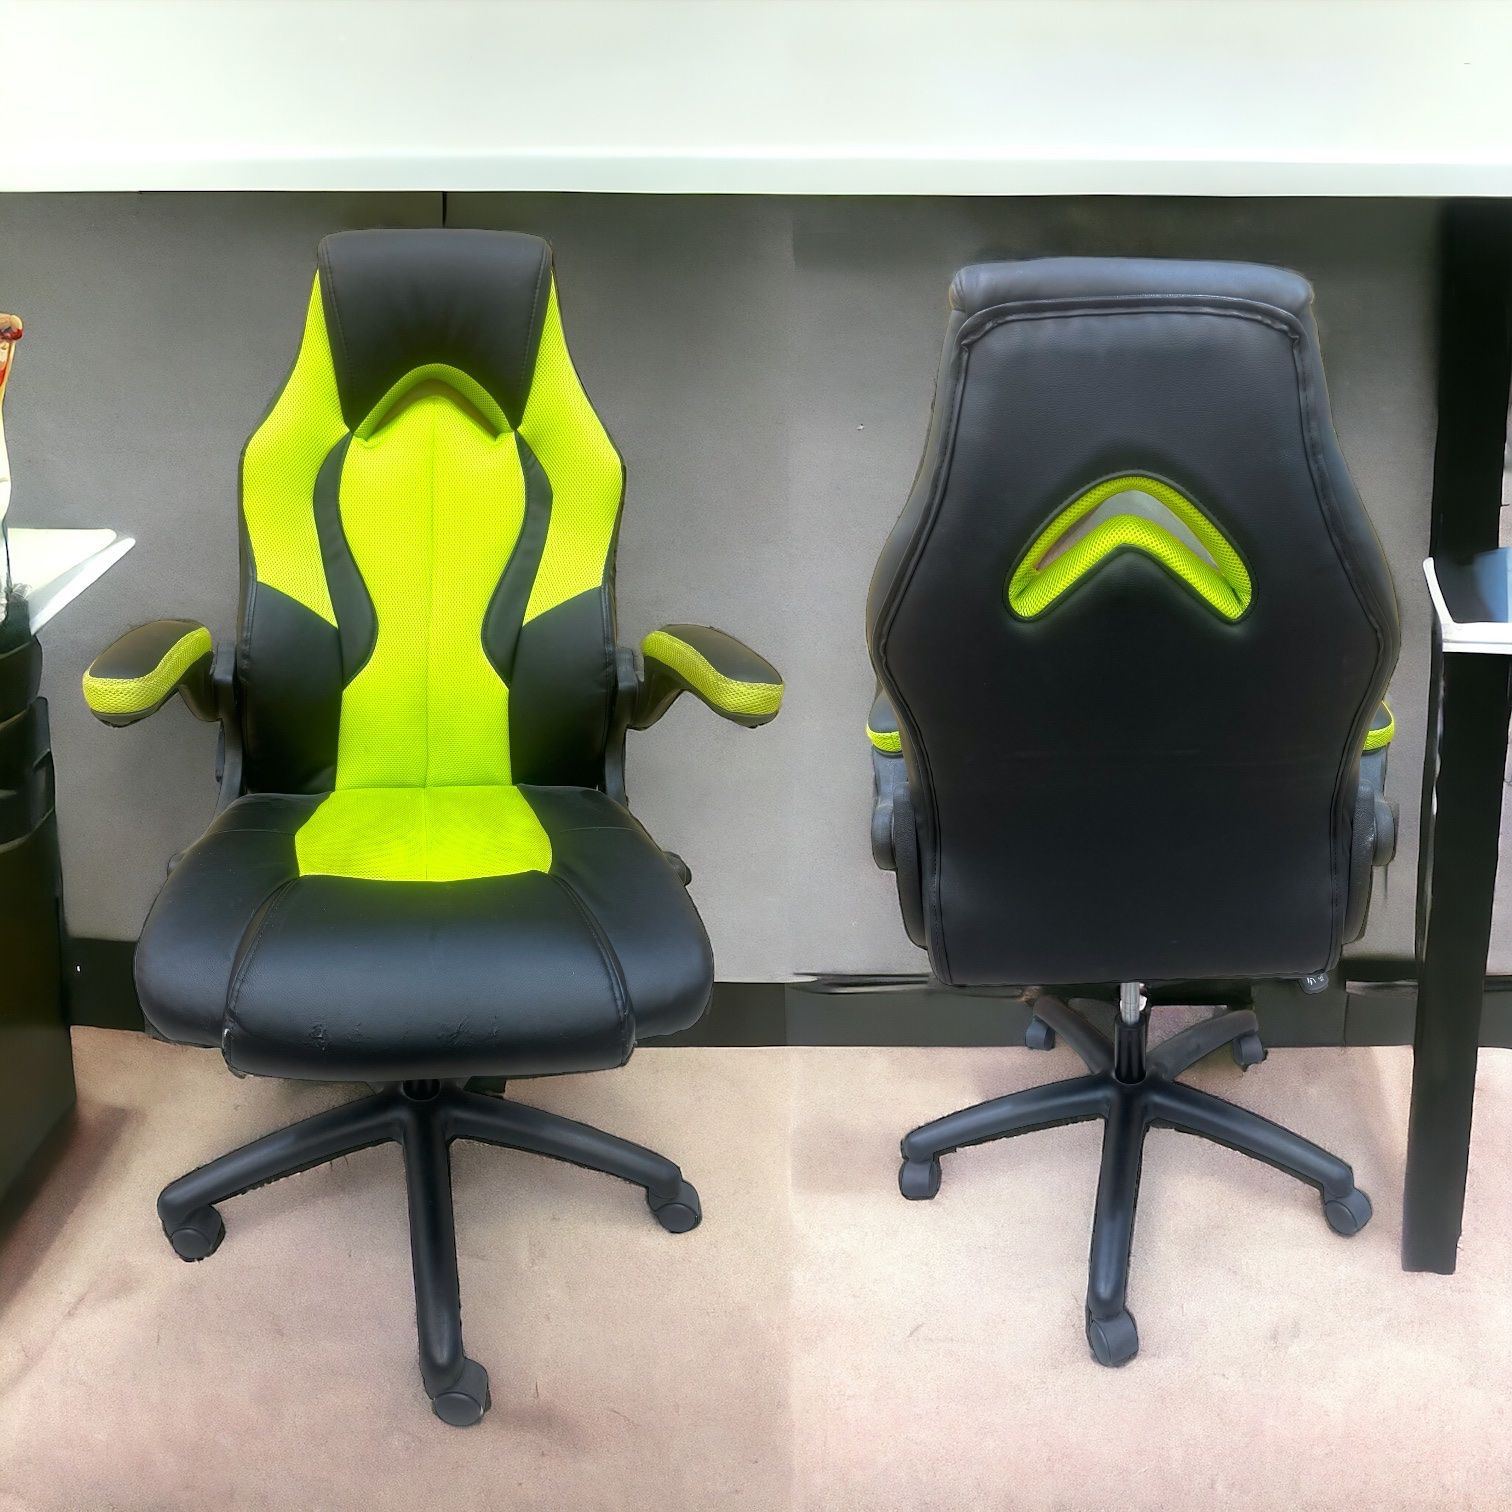 3 Swivel Office Chairs For Sale -  1 or All